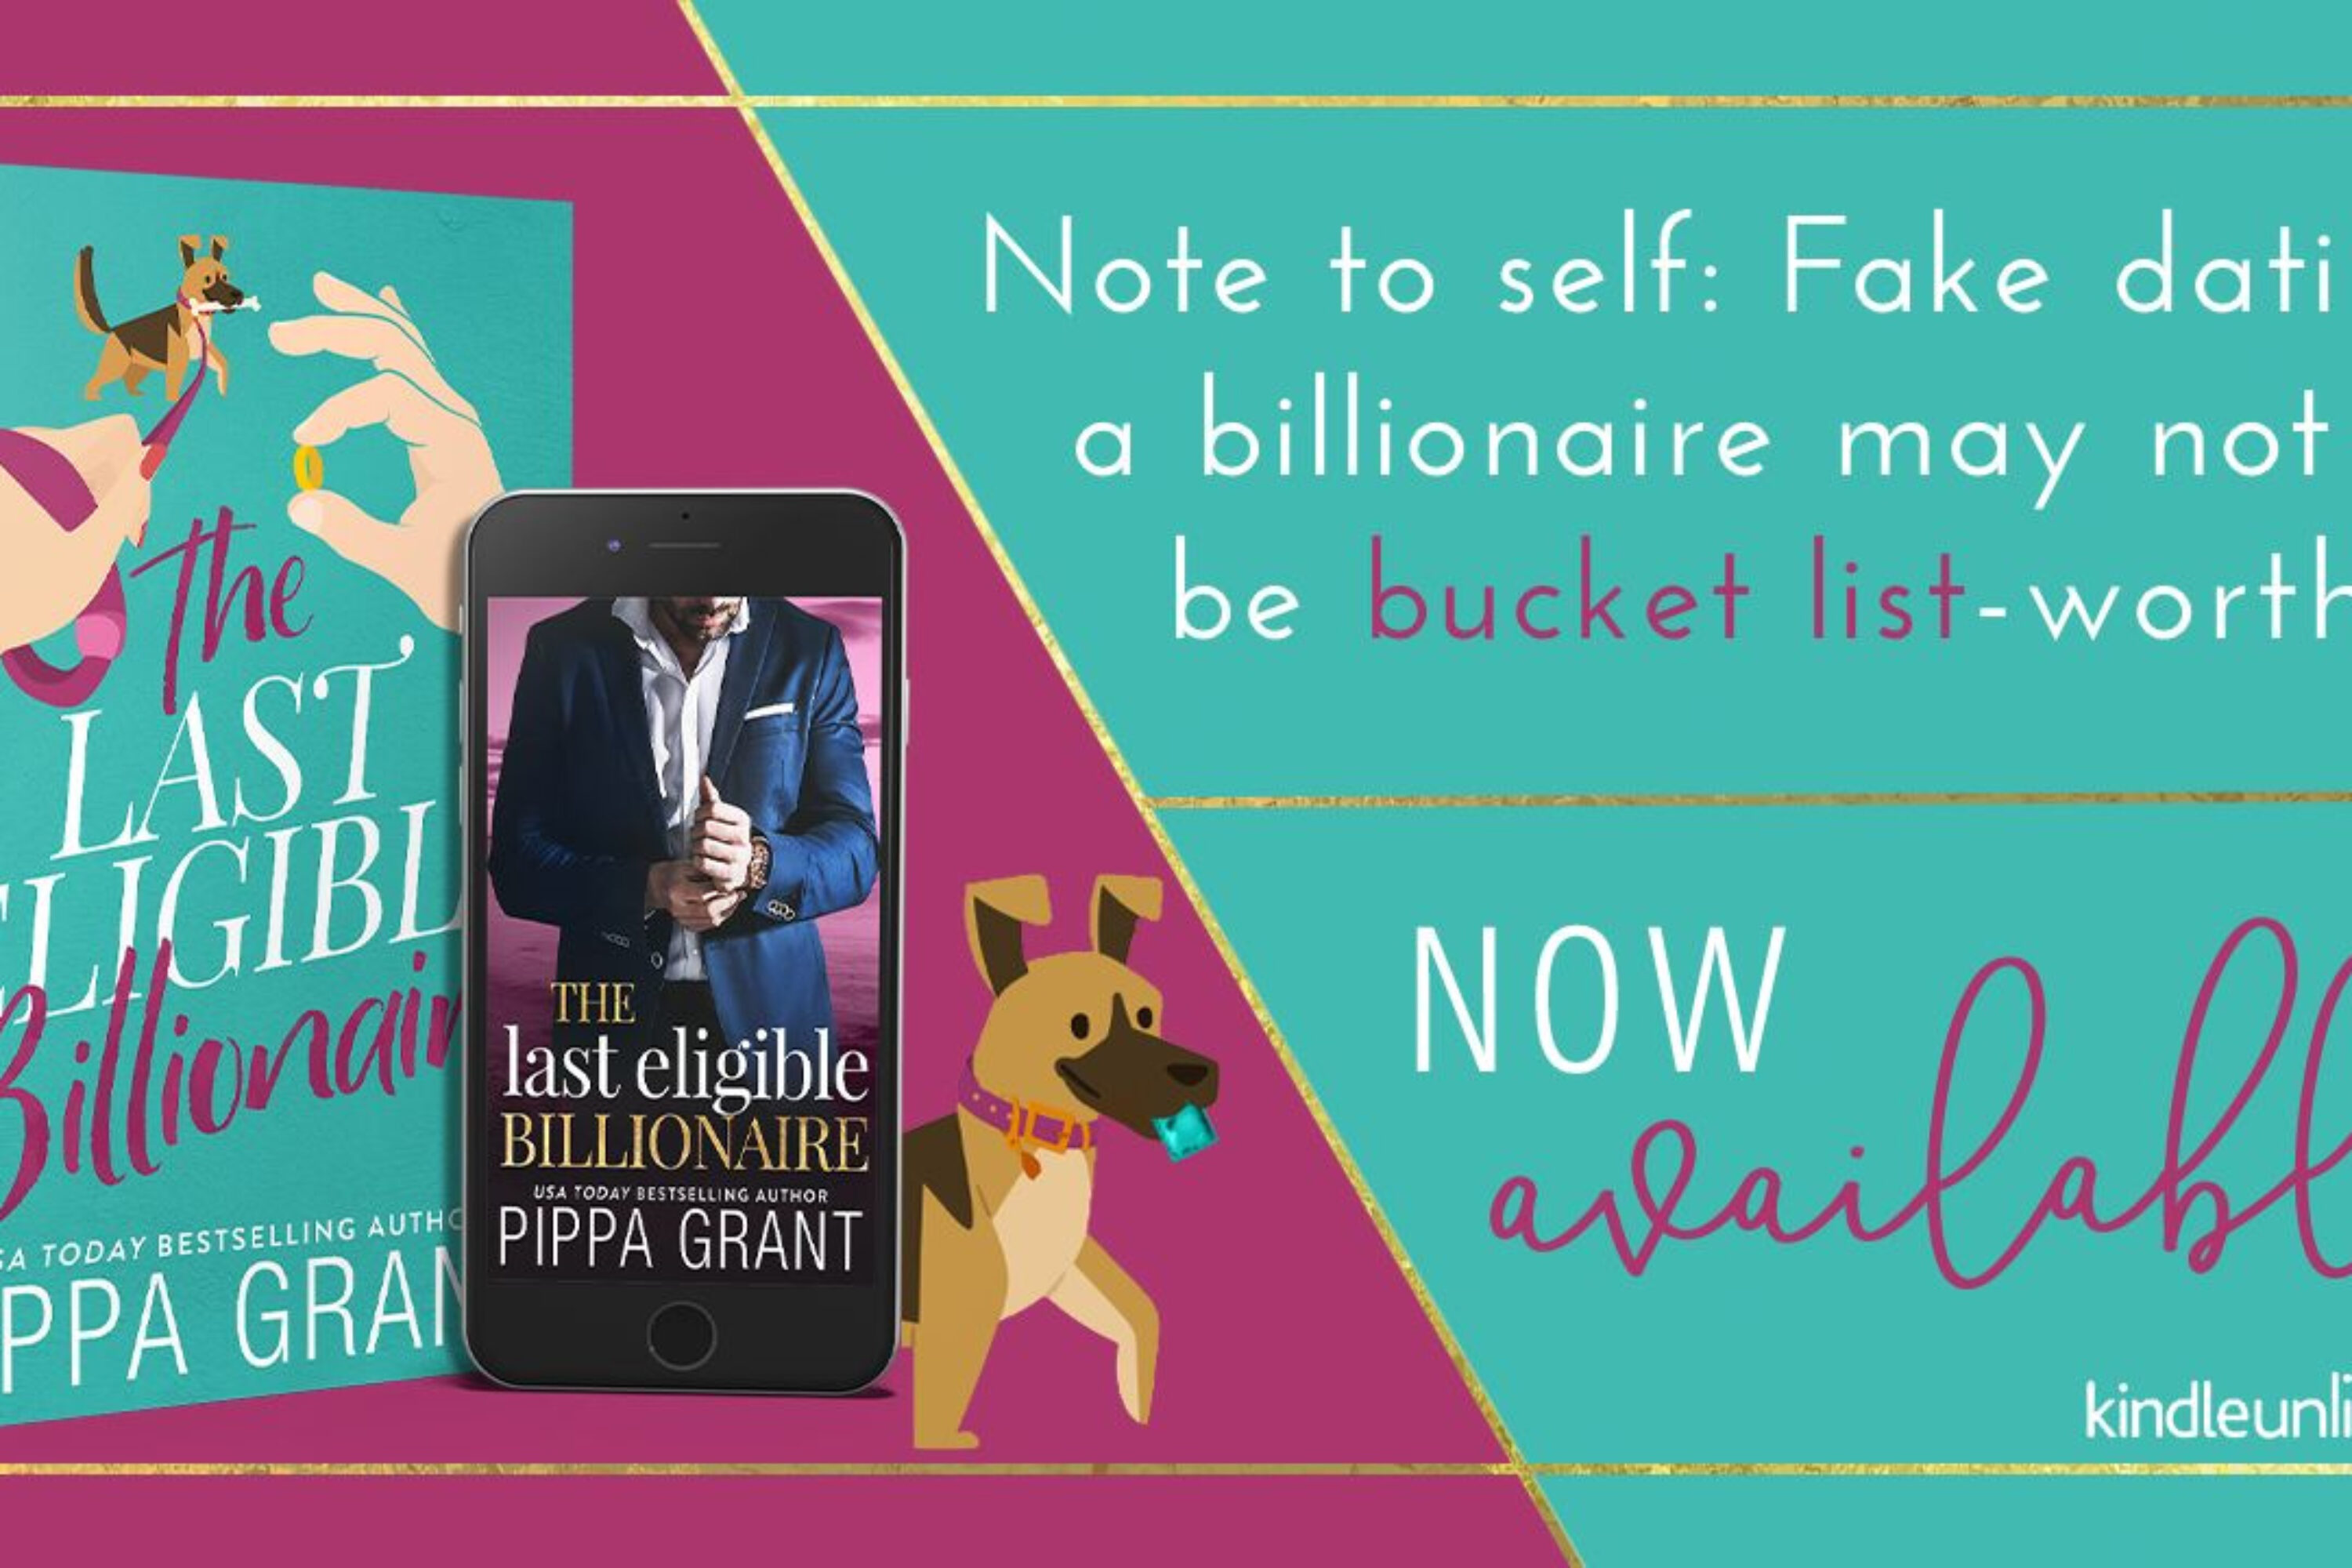 Release Boost: The Last Eligible Billionaire by Pippa Grant